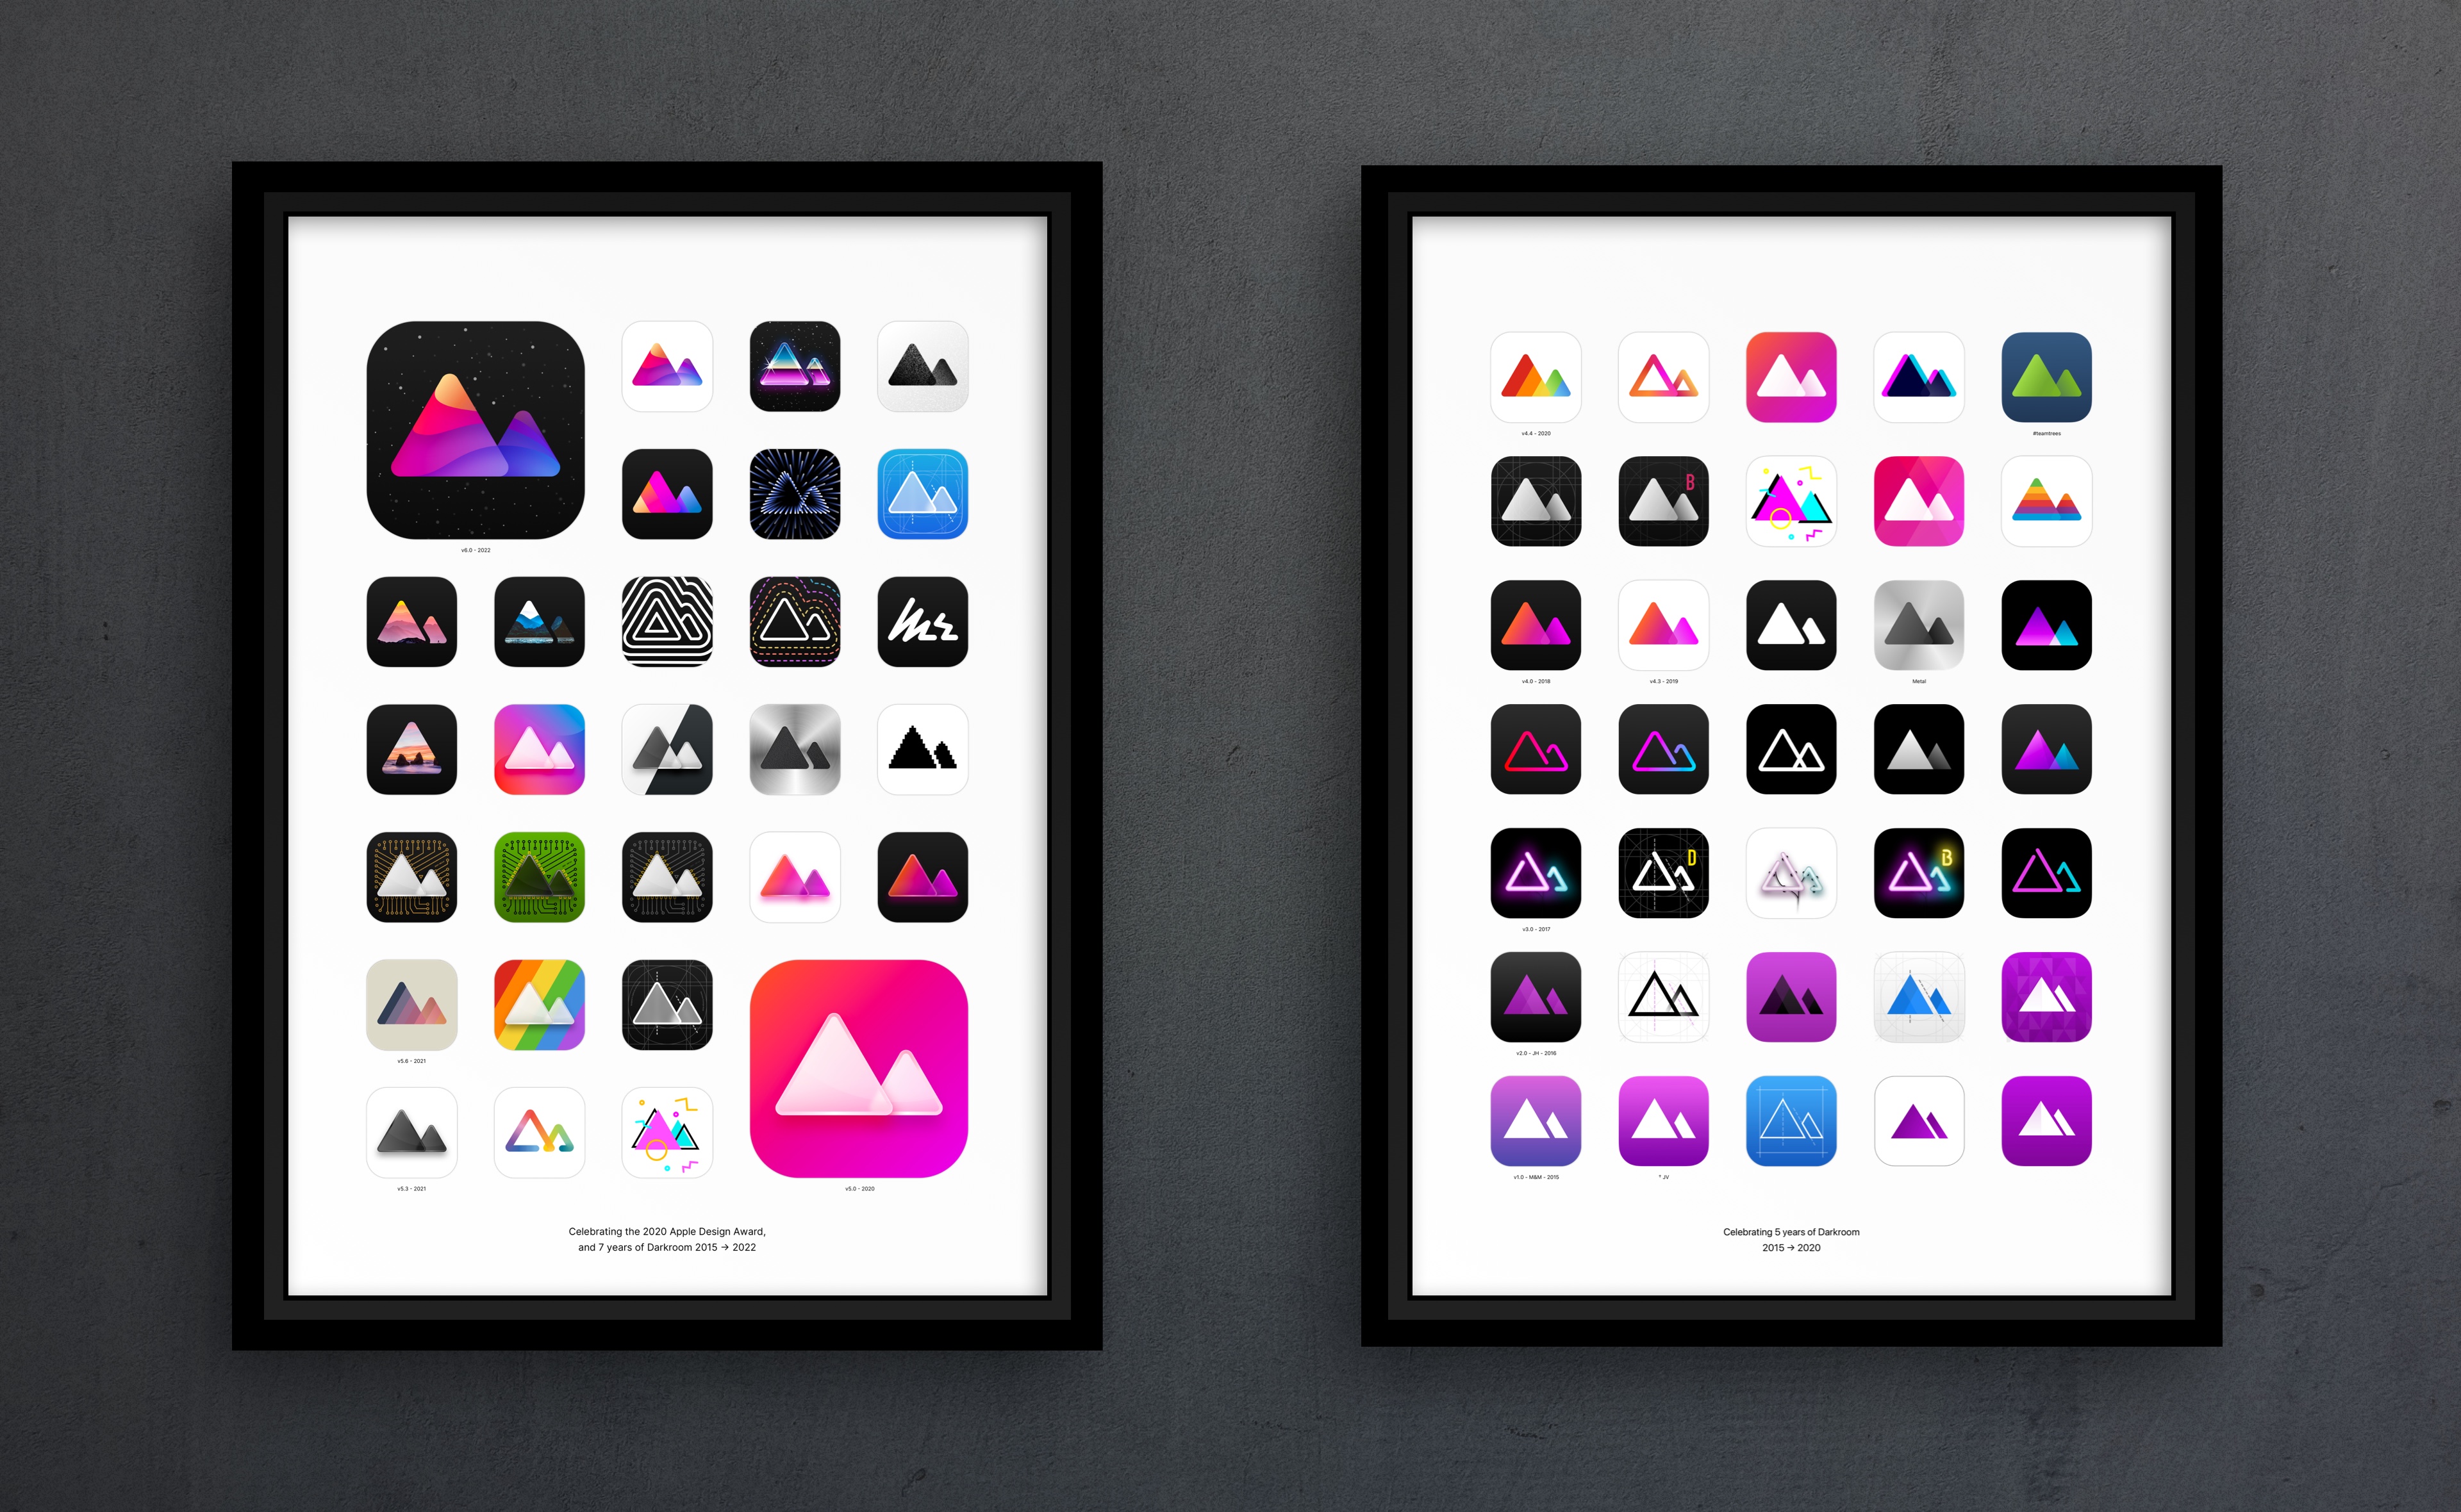 Two posters on a wall side-by-sde, each featuring a large selection of released and unreleased app icons